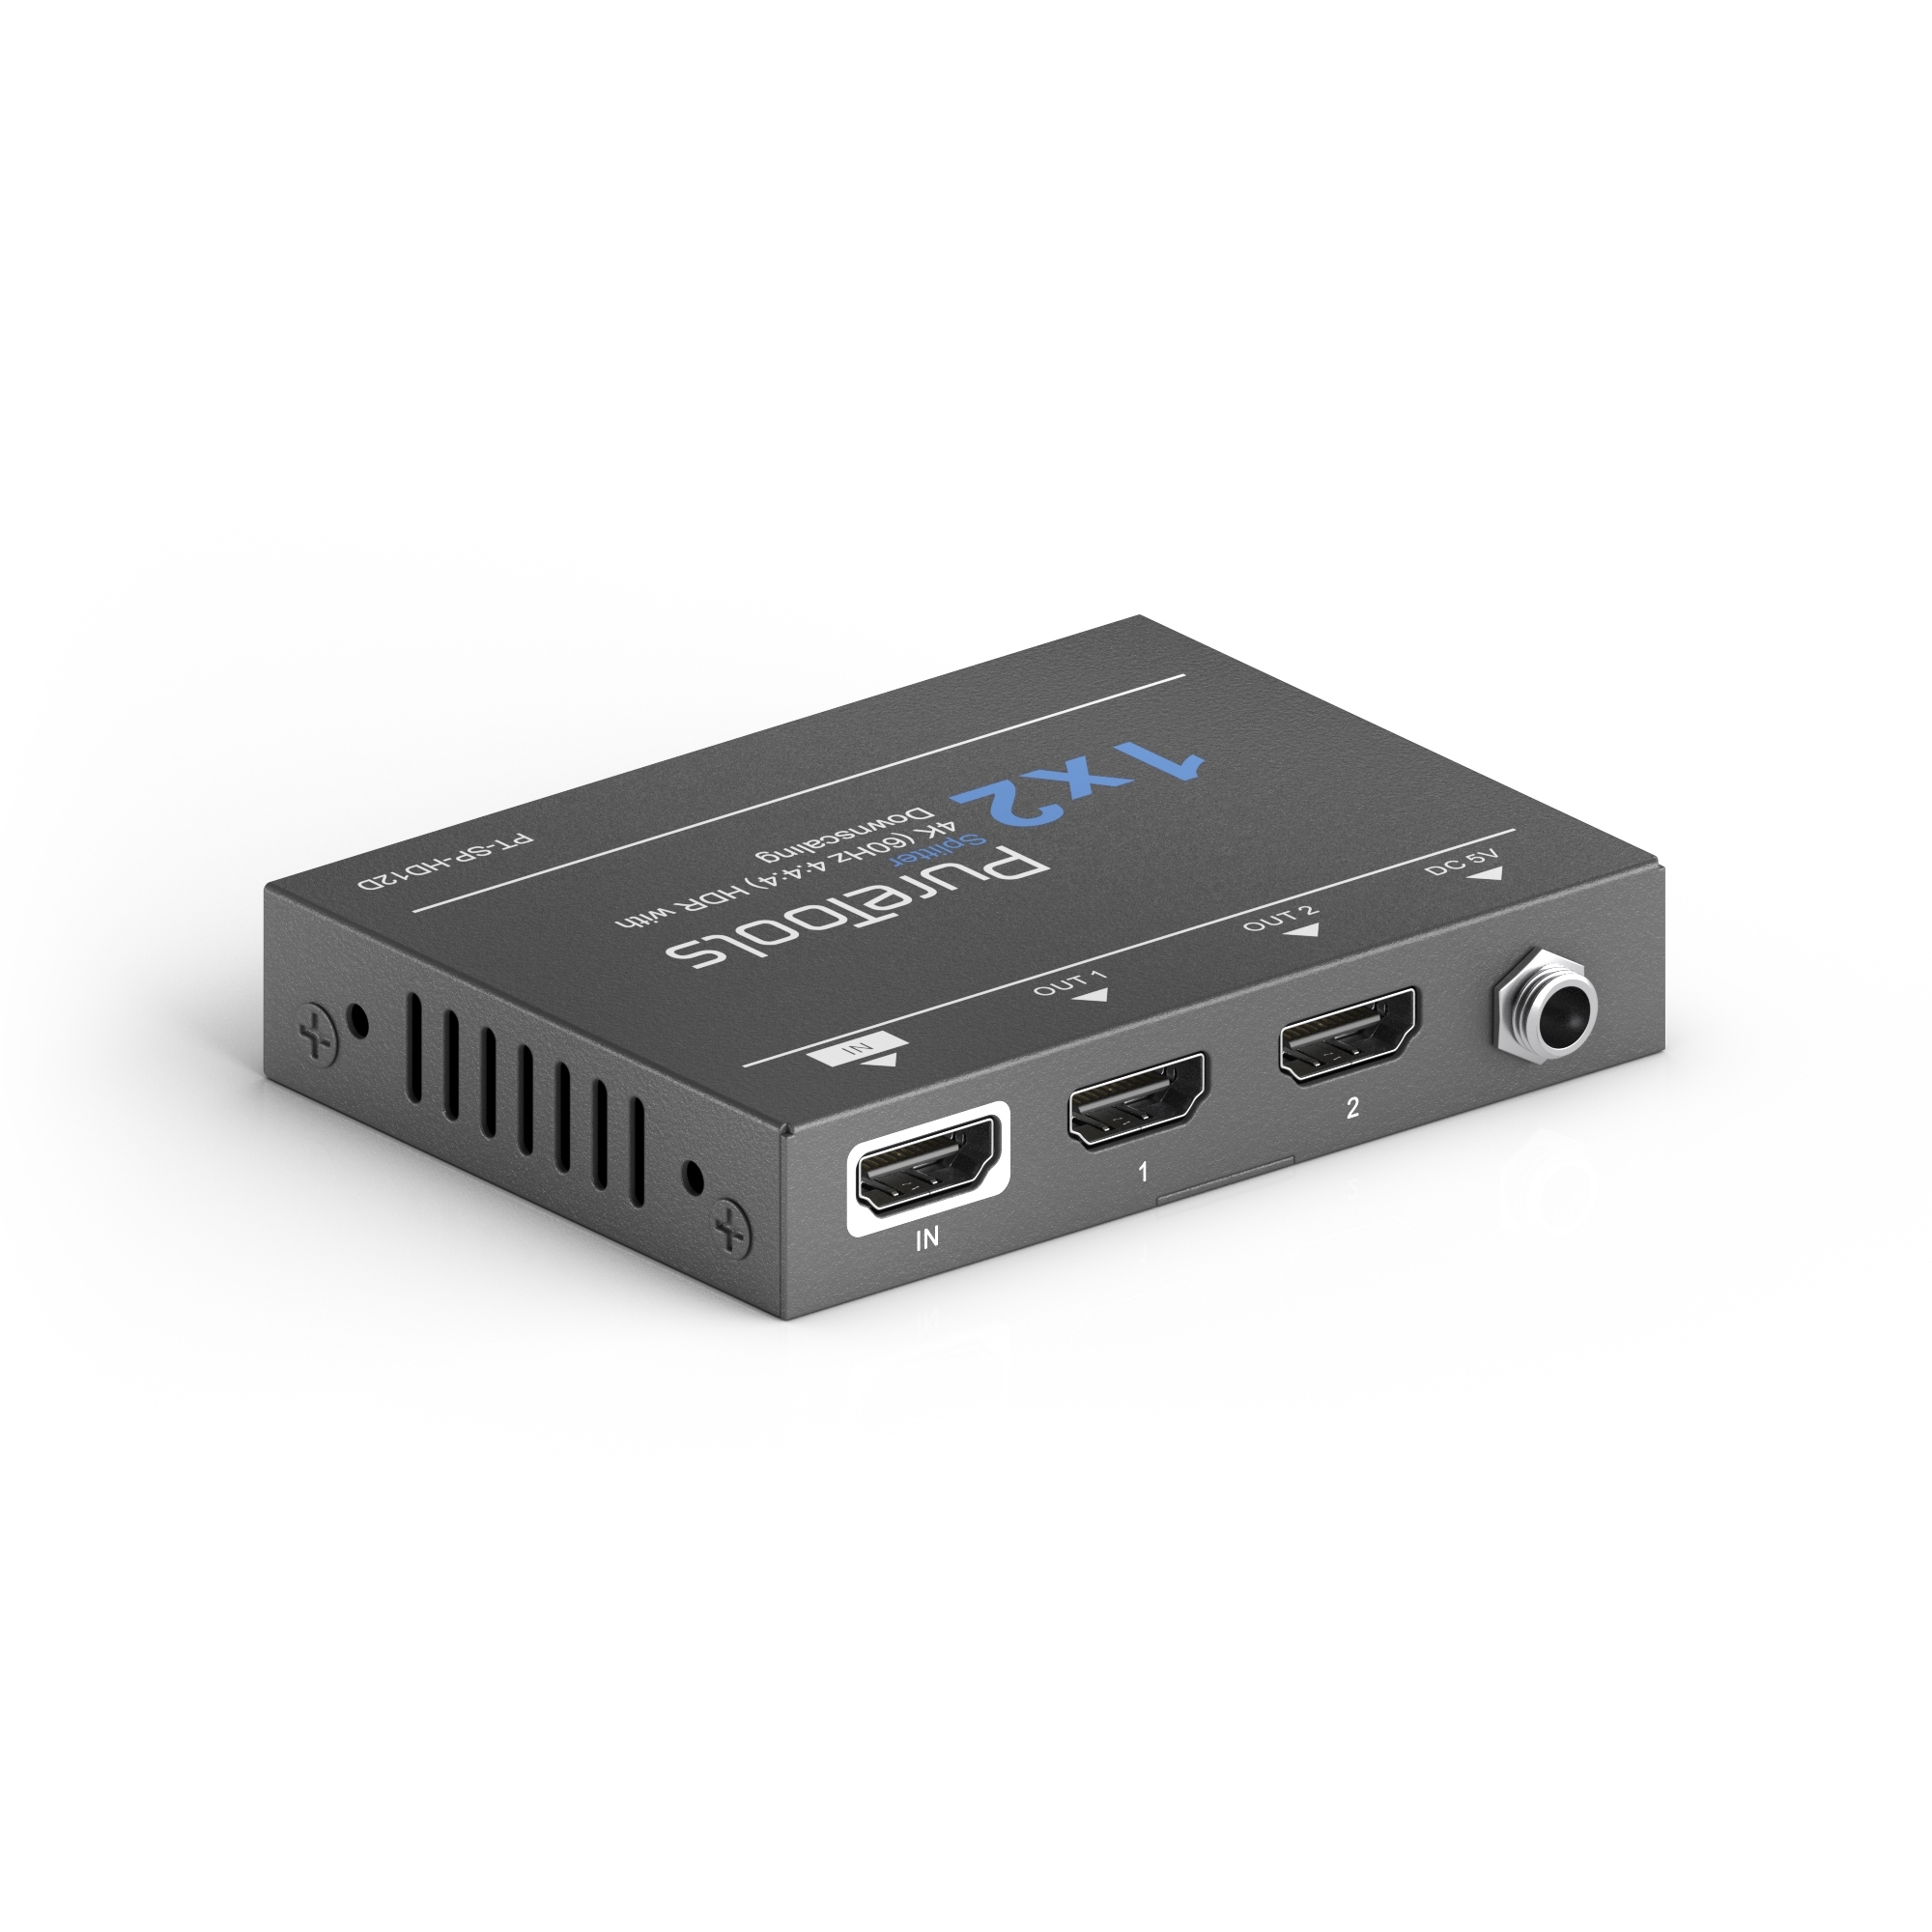 1x2 4K 18Gbps HDMI Splitter with Scaler, PureLink